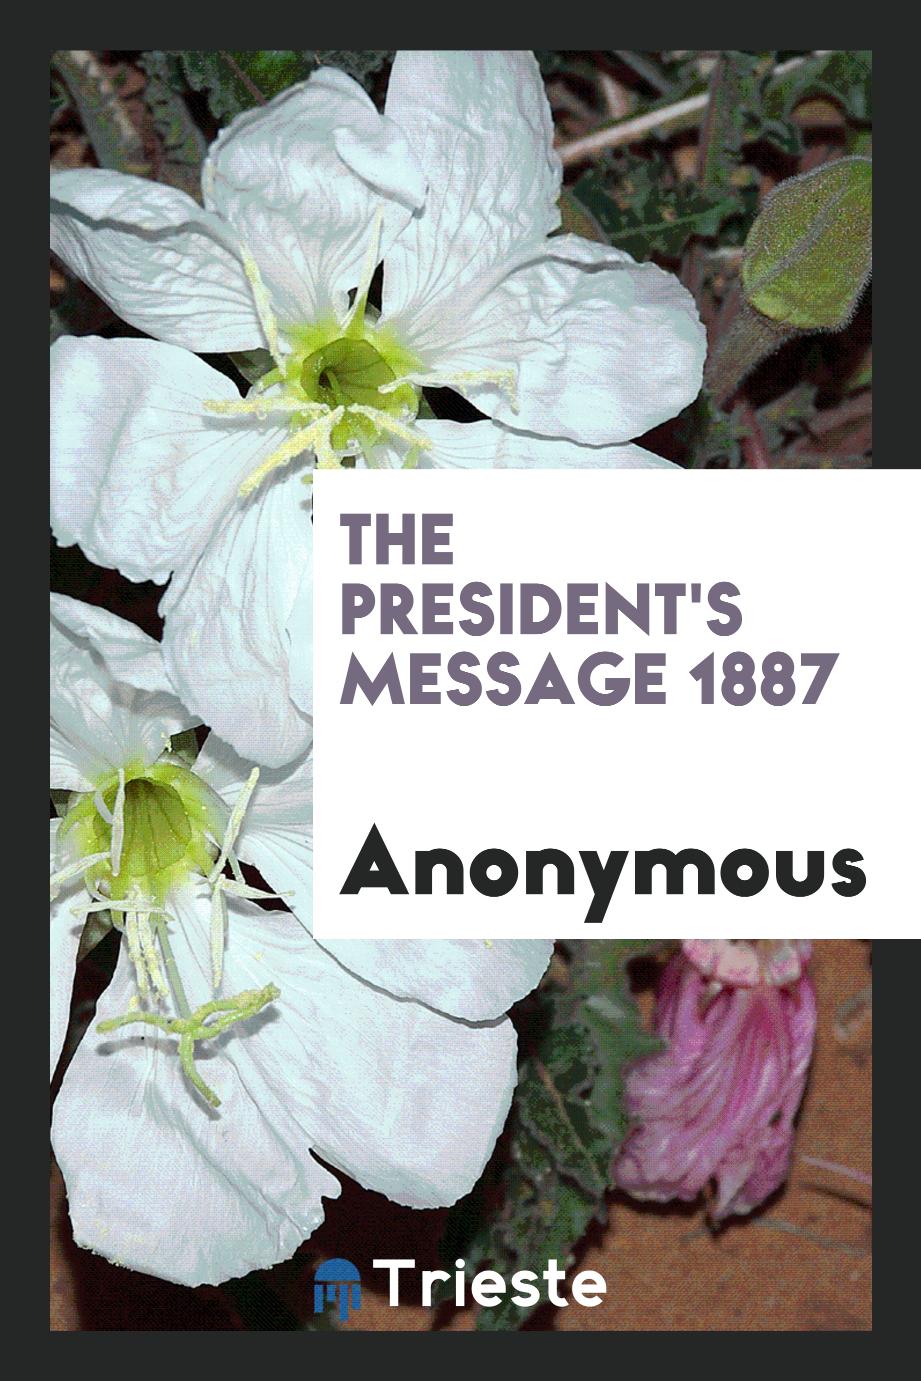 The President's message 1887